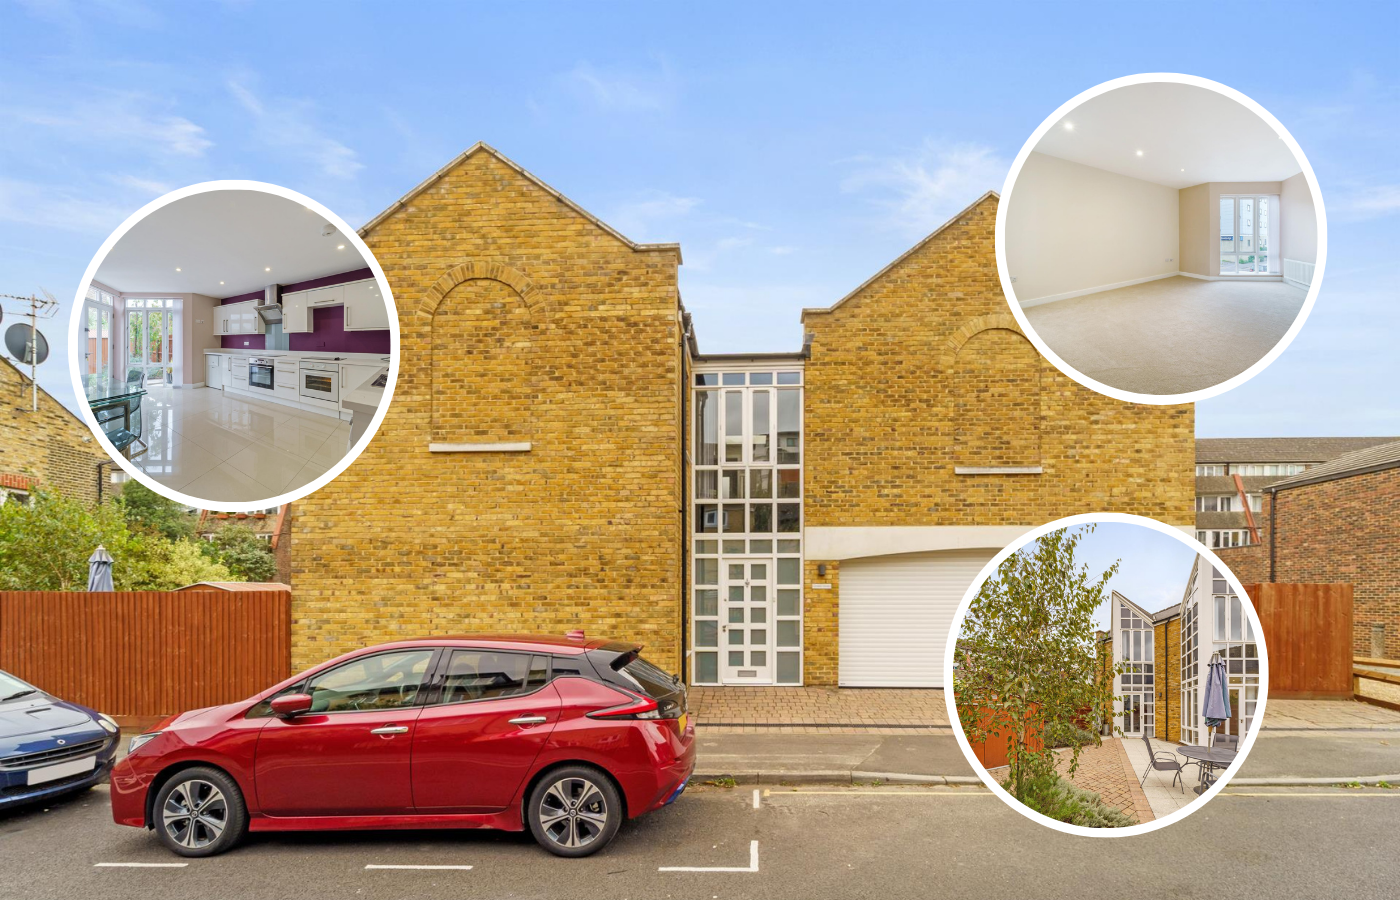 This Brentford property features four bedrooms, multiple bathrooms and a garage (credit: John & Co).  